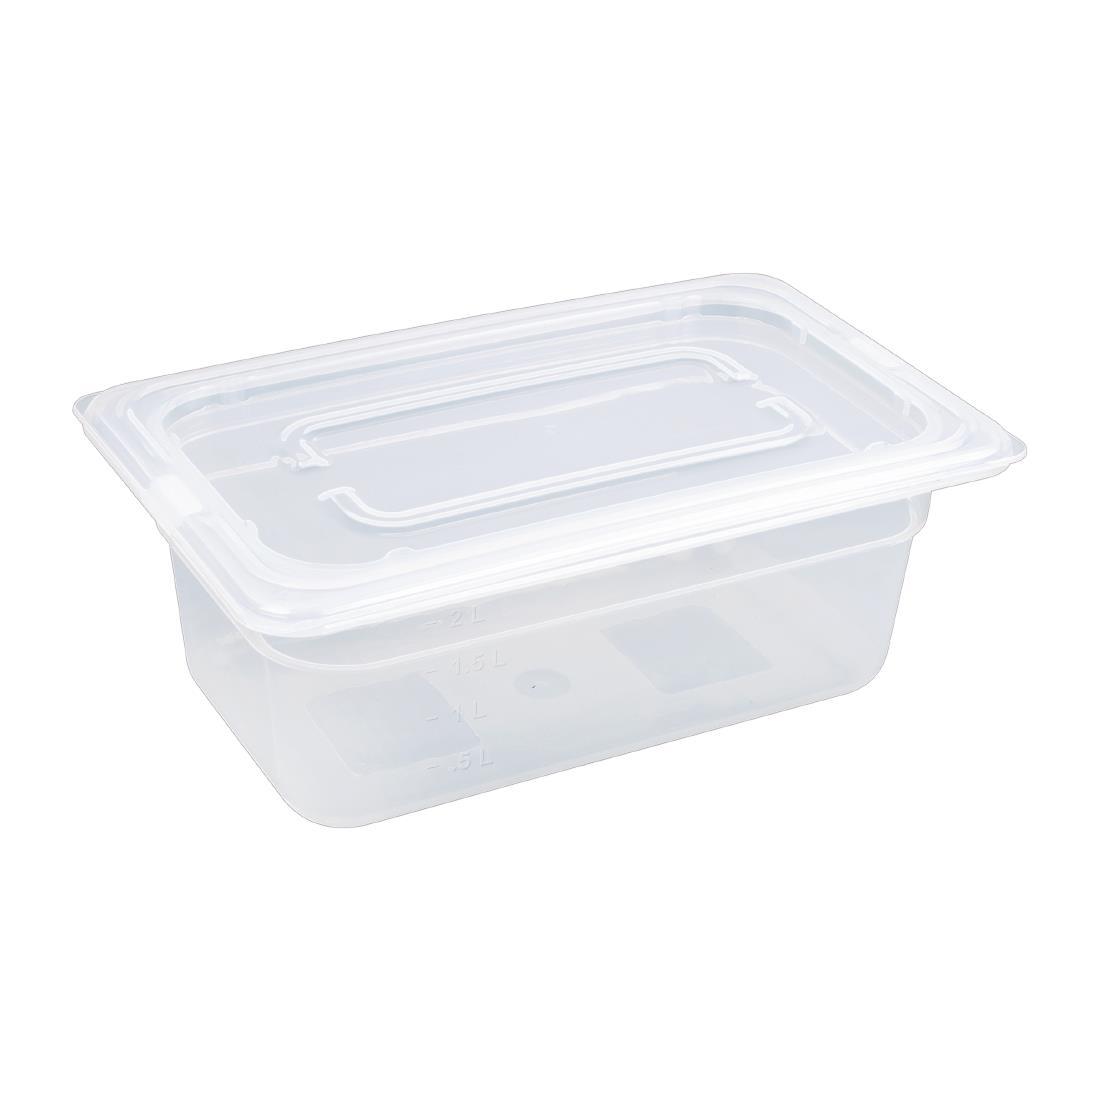 Vogue Polypropylene 1/4 Gastronorm Container with Lid 100mm (Pack of 4) - GJ523  - 2